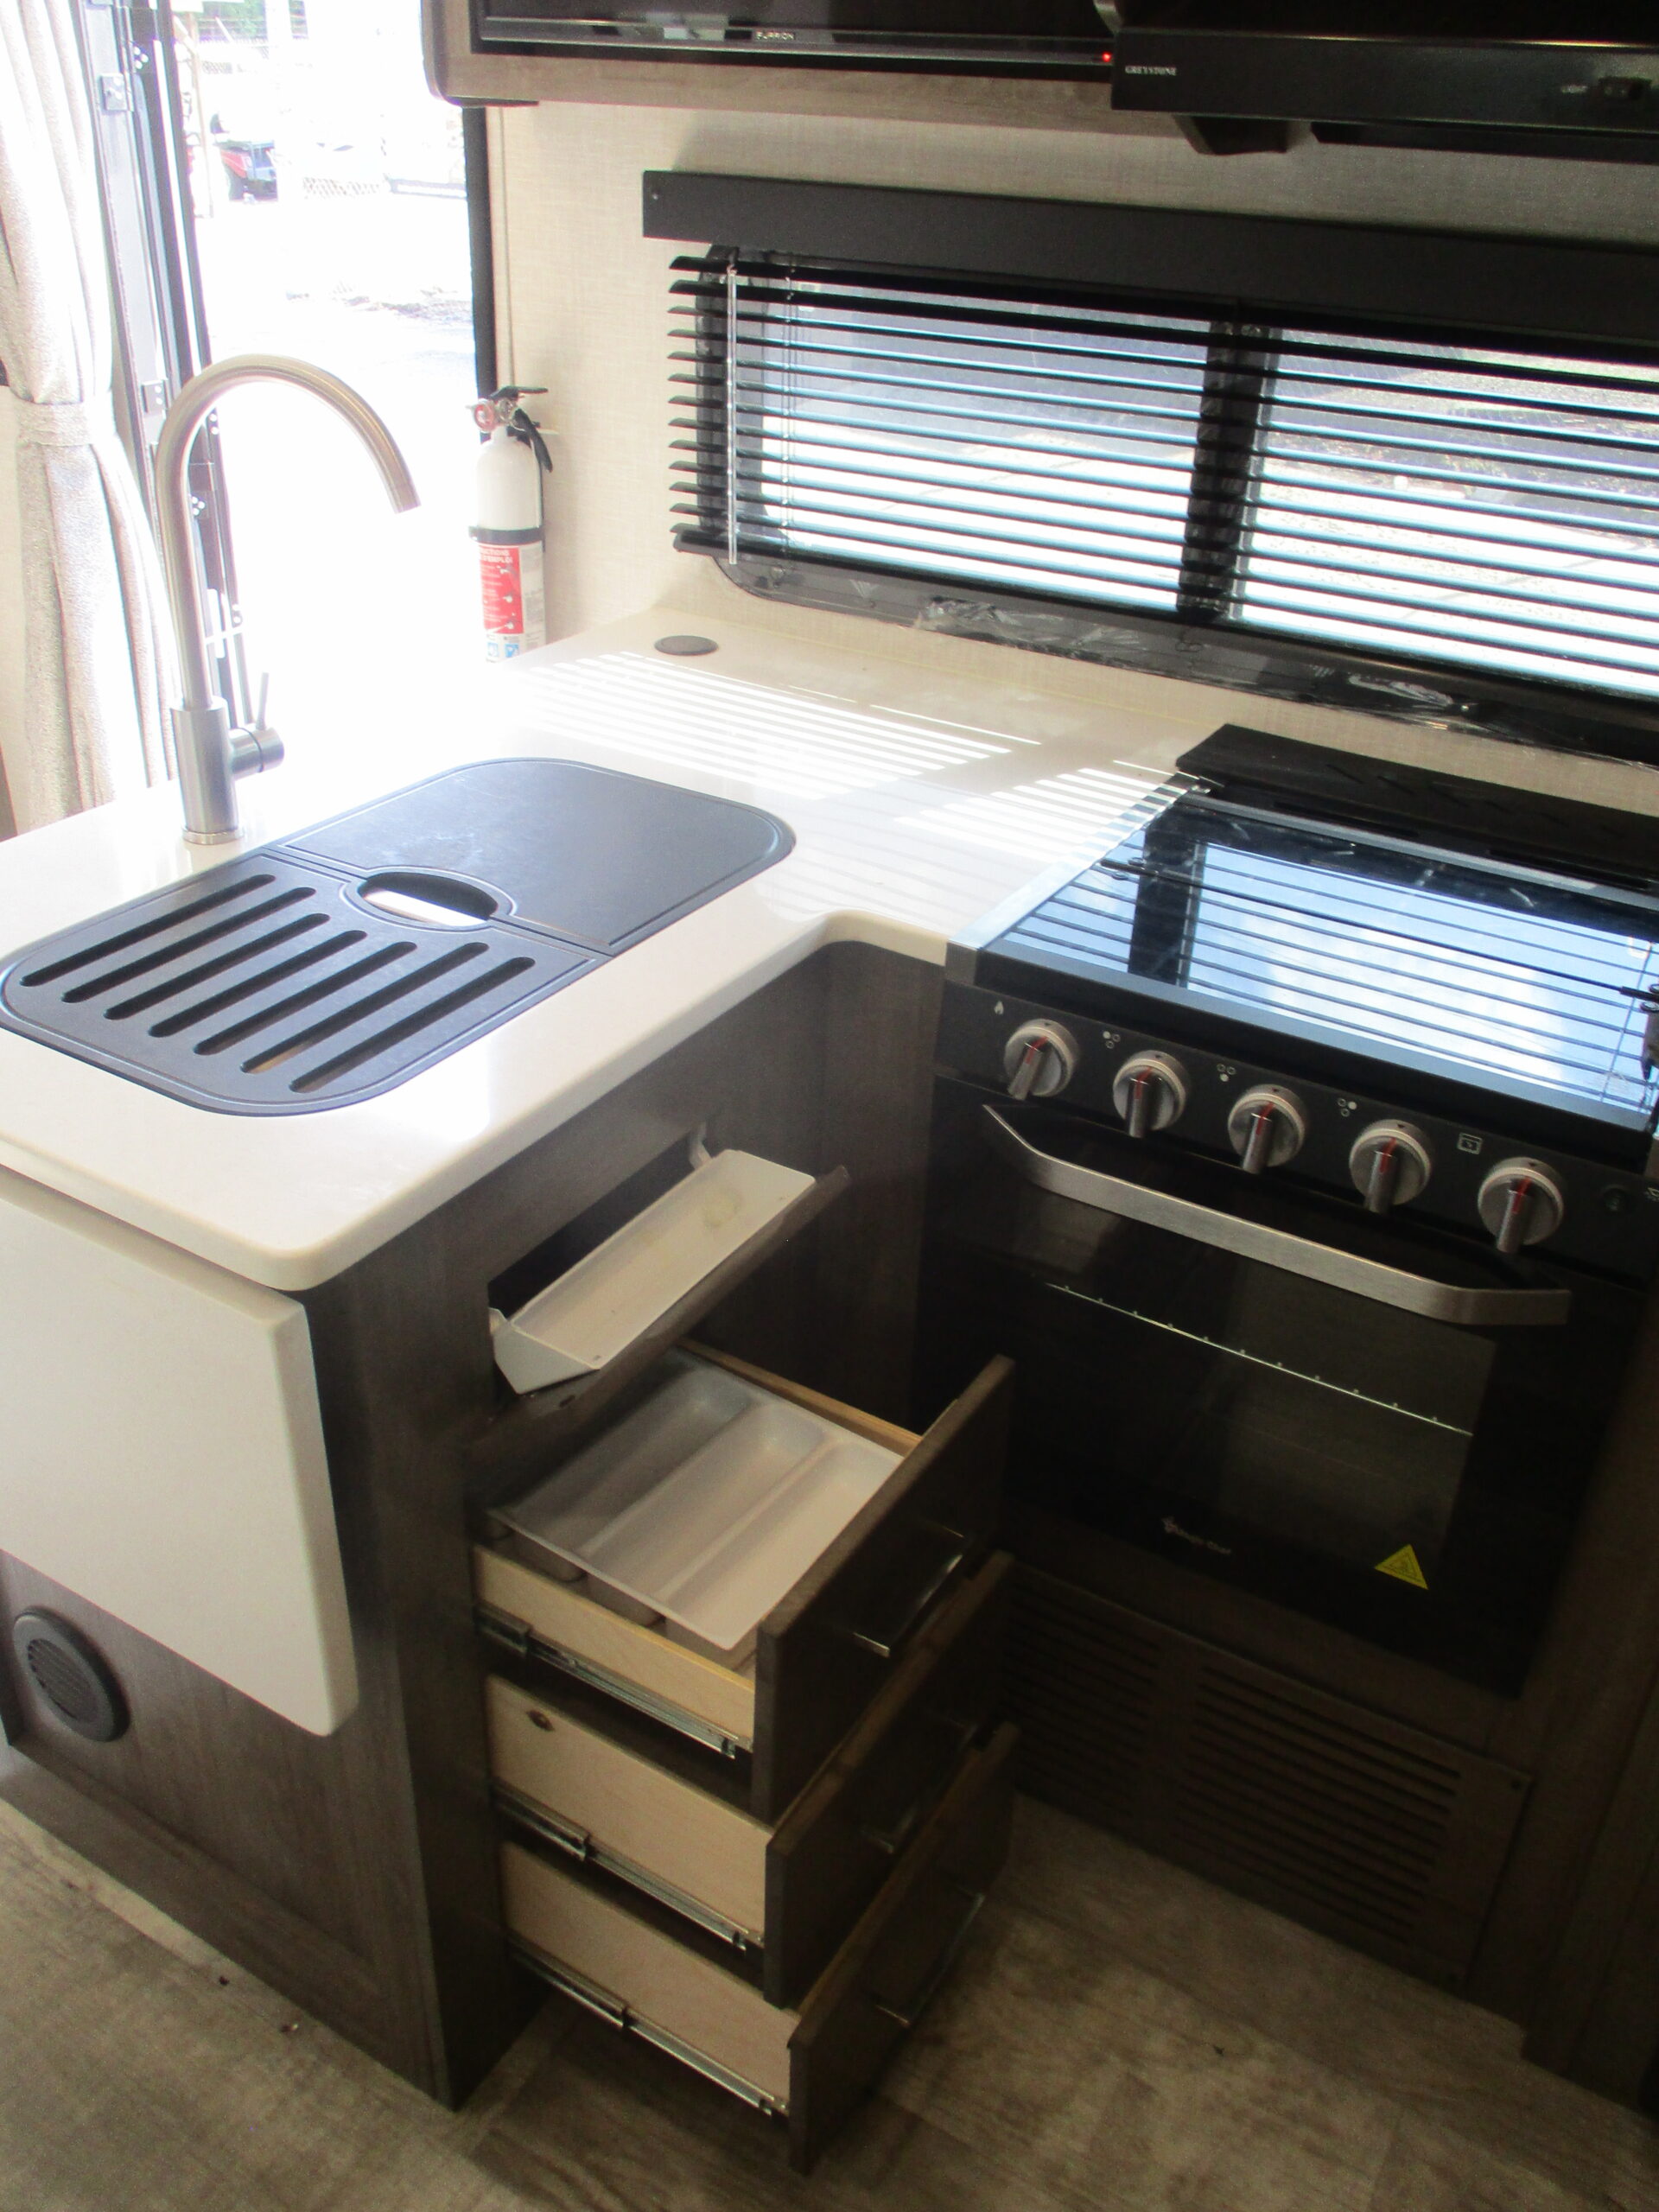 Pre Owned Camping Trailers within driving distance of Statesville, NC.